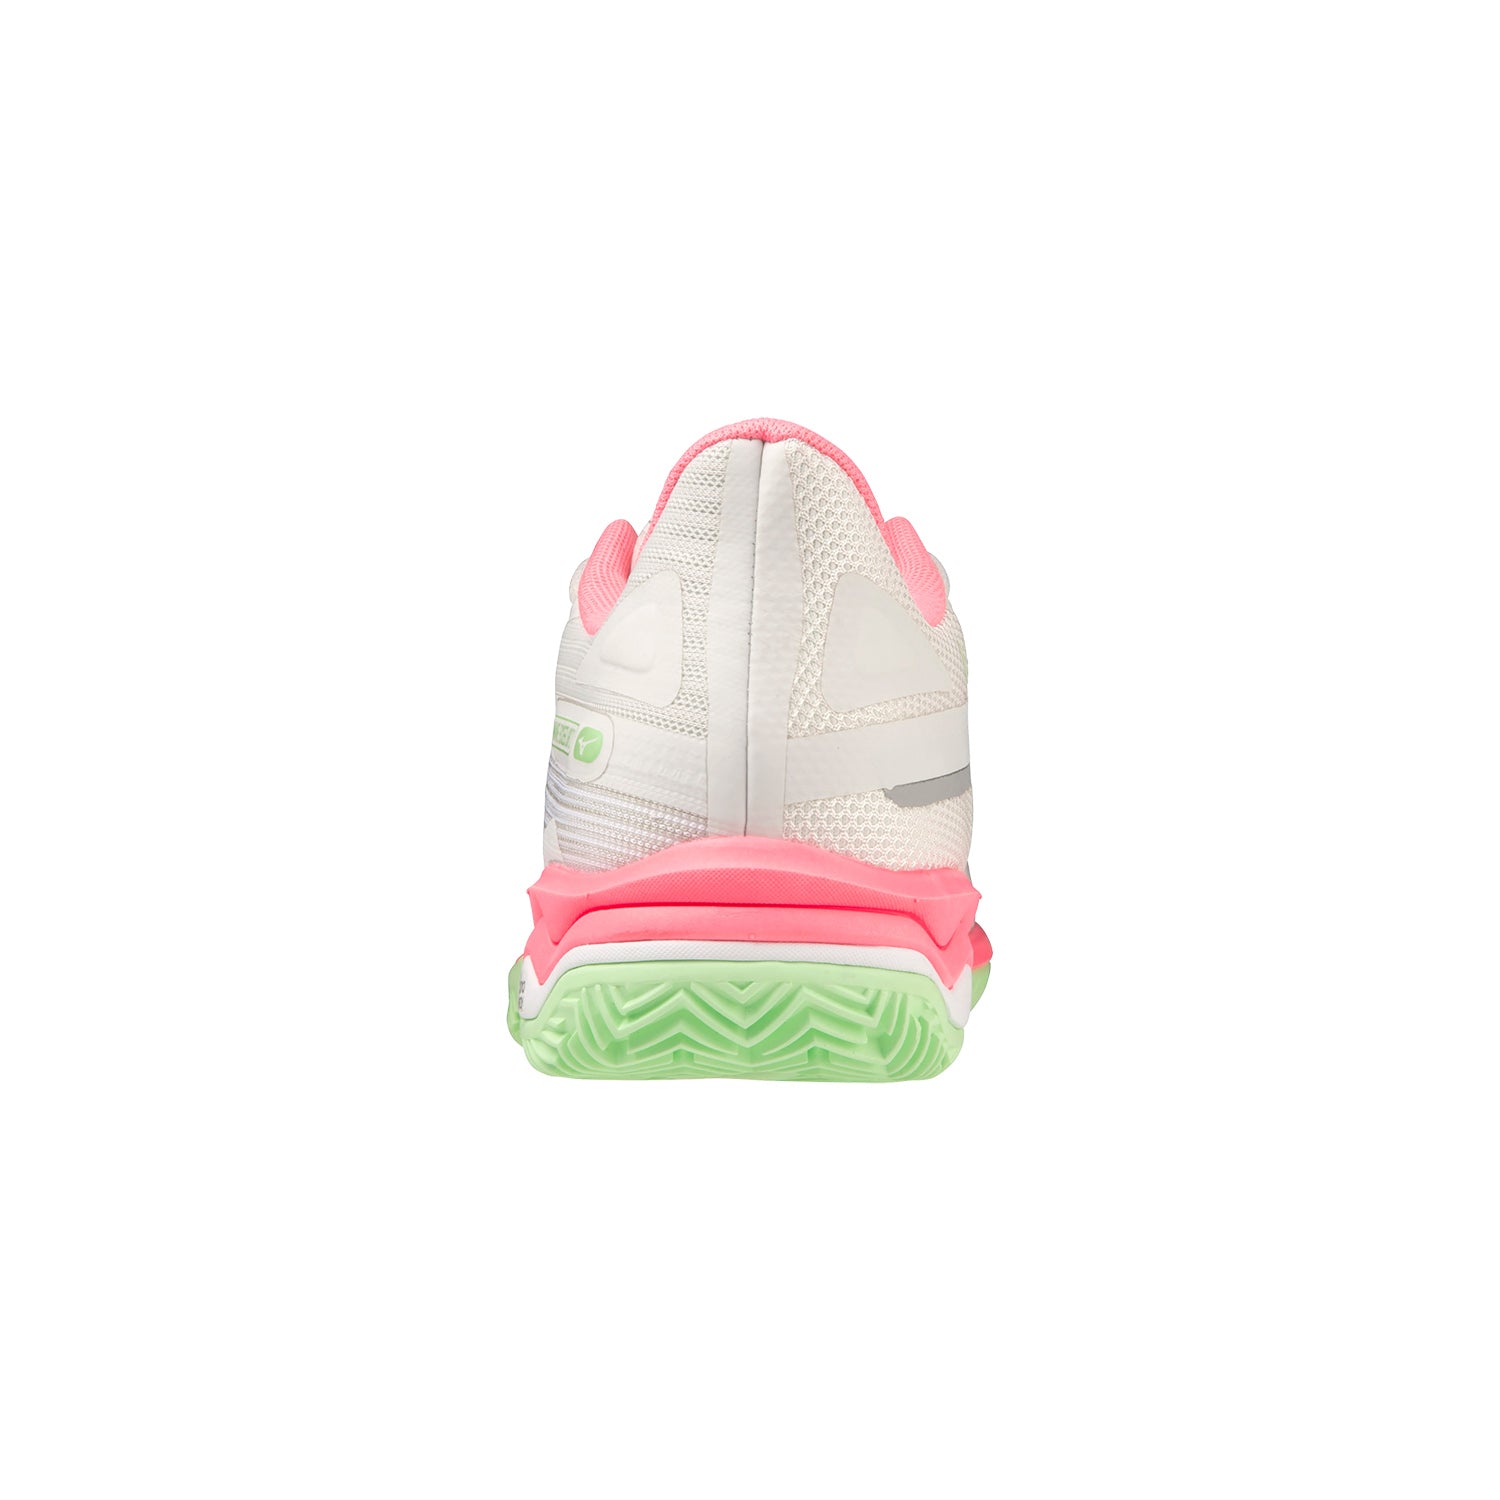 WAVE EXCEED LIGHT 2 PADEL PADEL SHOES